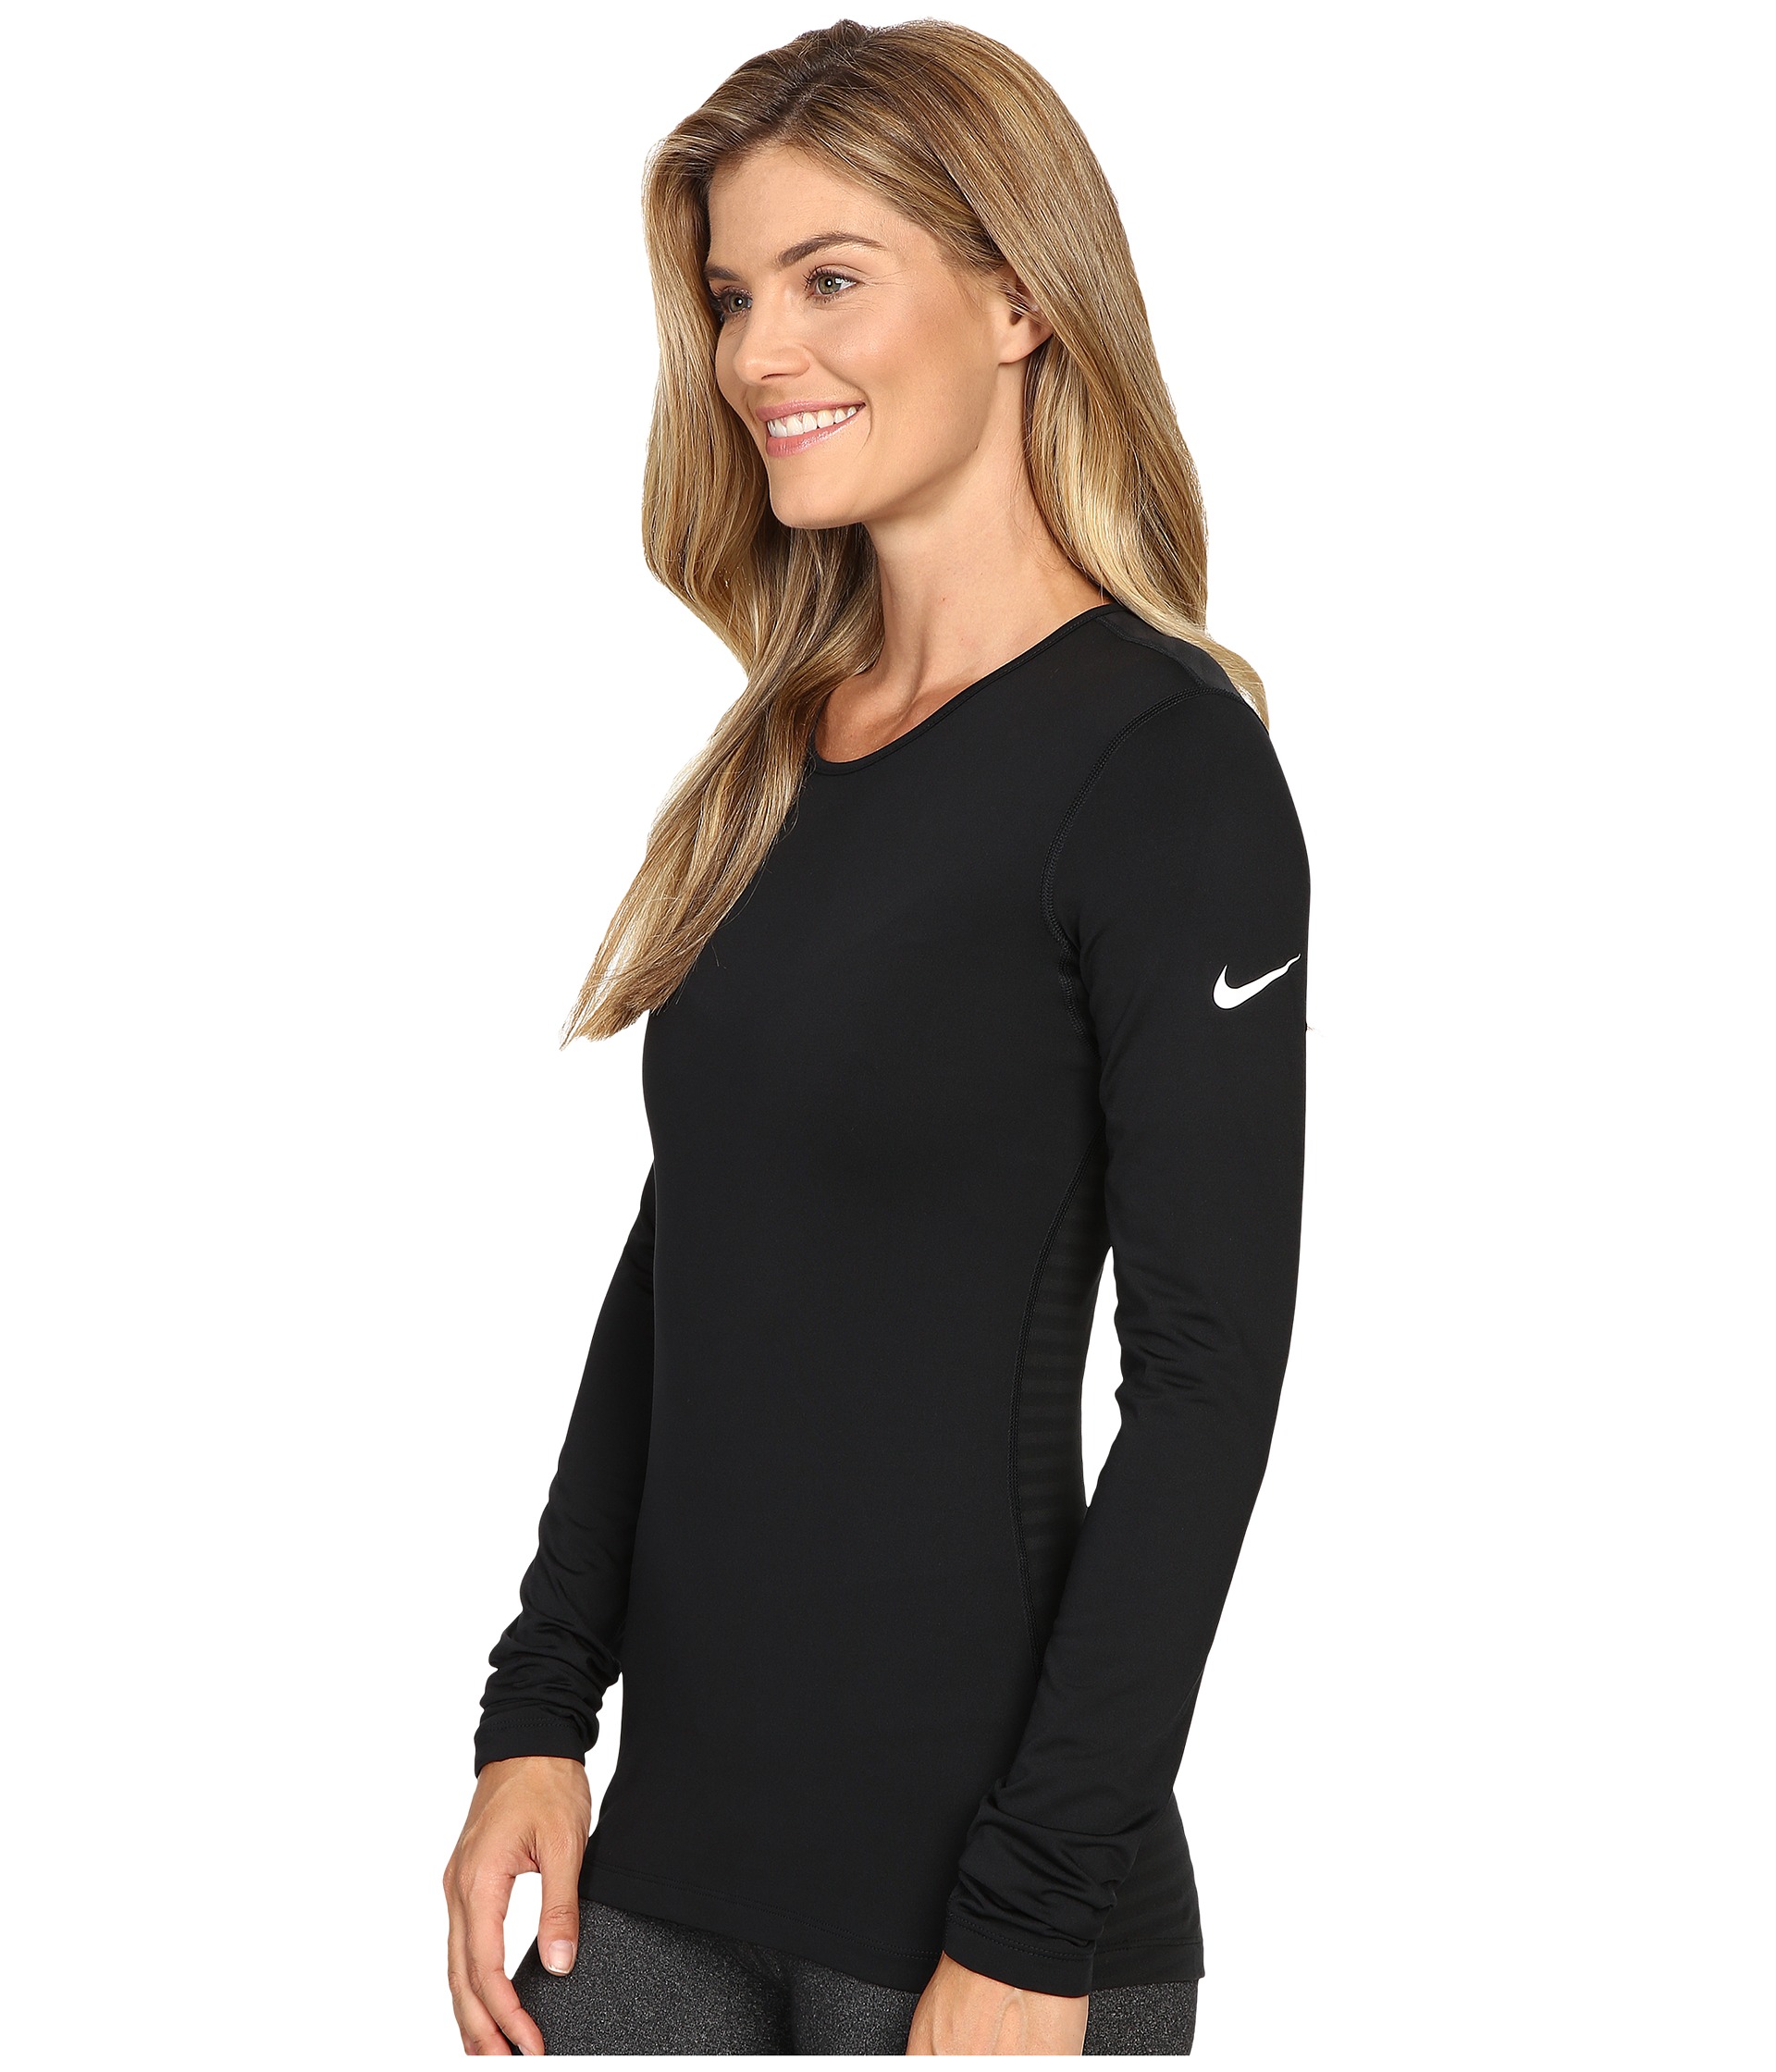 Nike Pro Warm Long Sleeve Training Top at Zappos.com